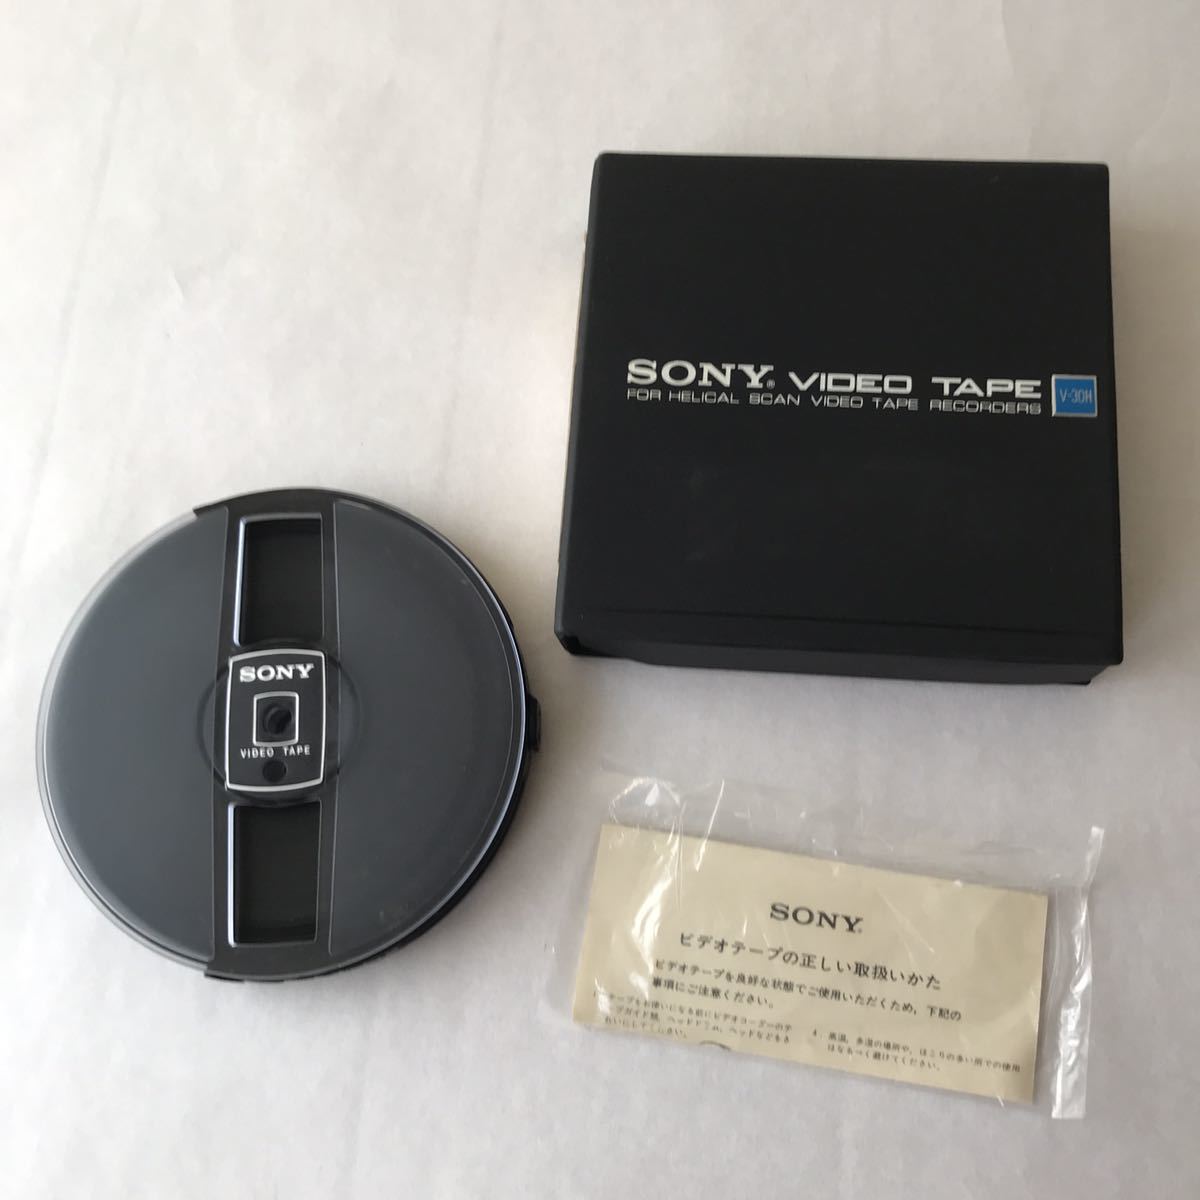 Sony VIDEO TAPE V-30H for HELICAL SCAN VIDEO TAPE RECORDERS ジャンク_画像1